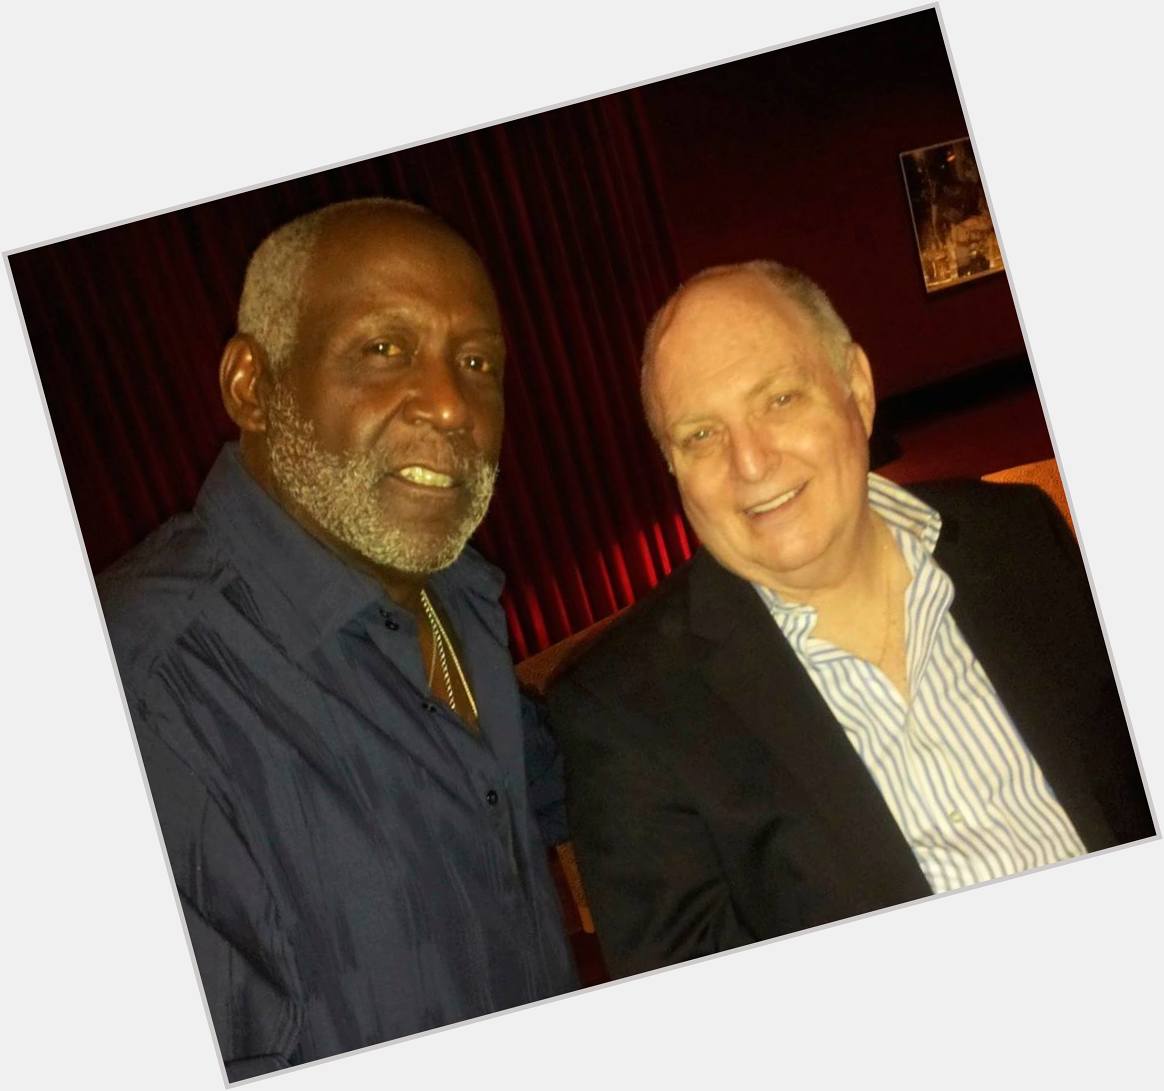 Happy Birthday Richard Roundtree! Friends then, friends now!
July 9, 1942 